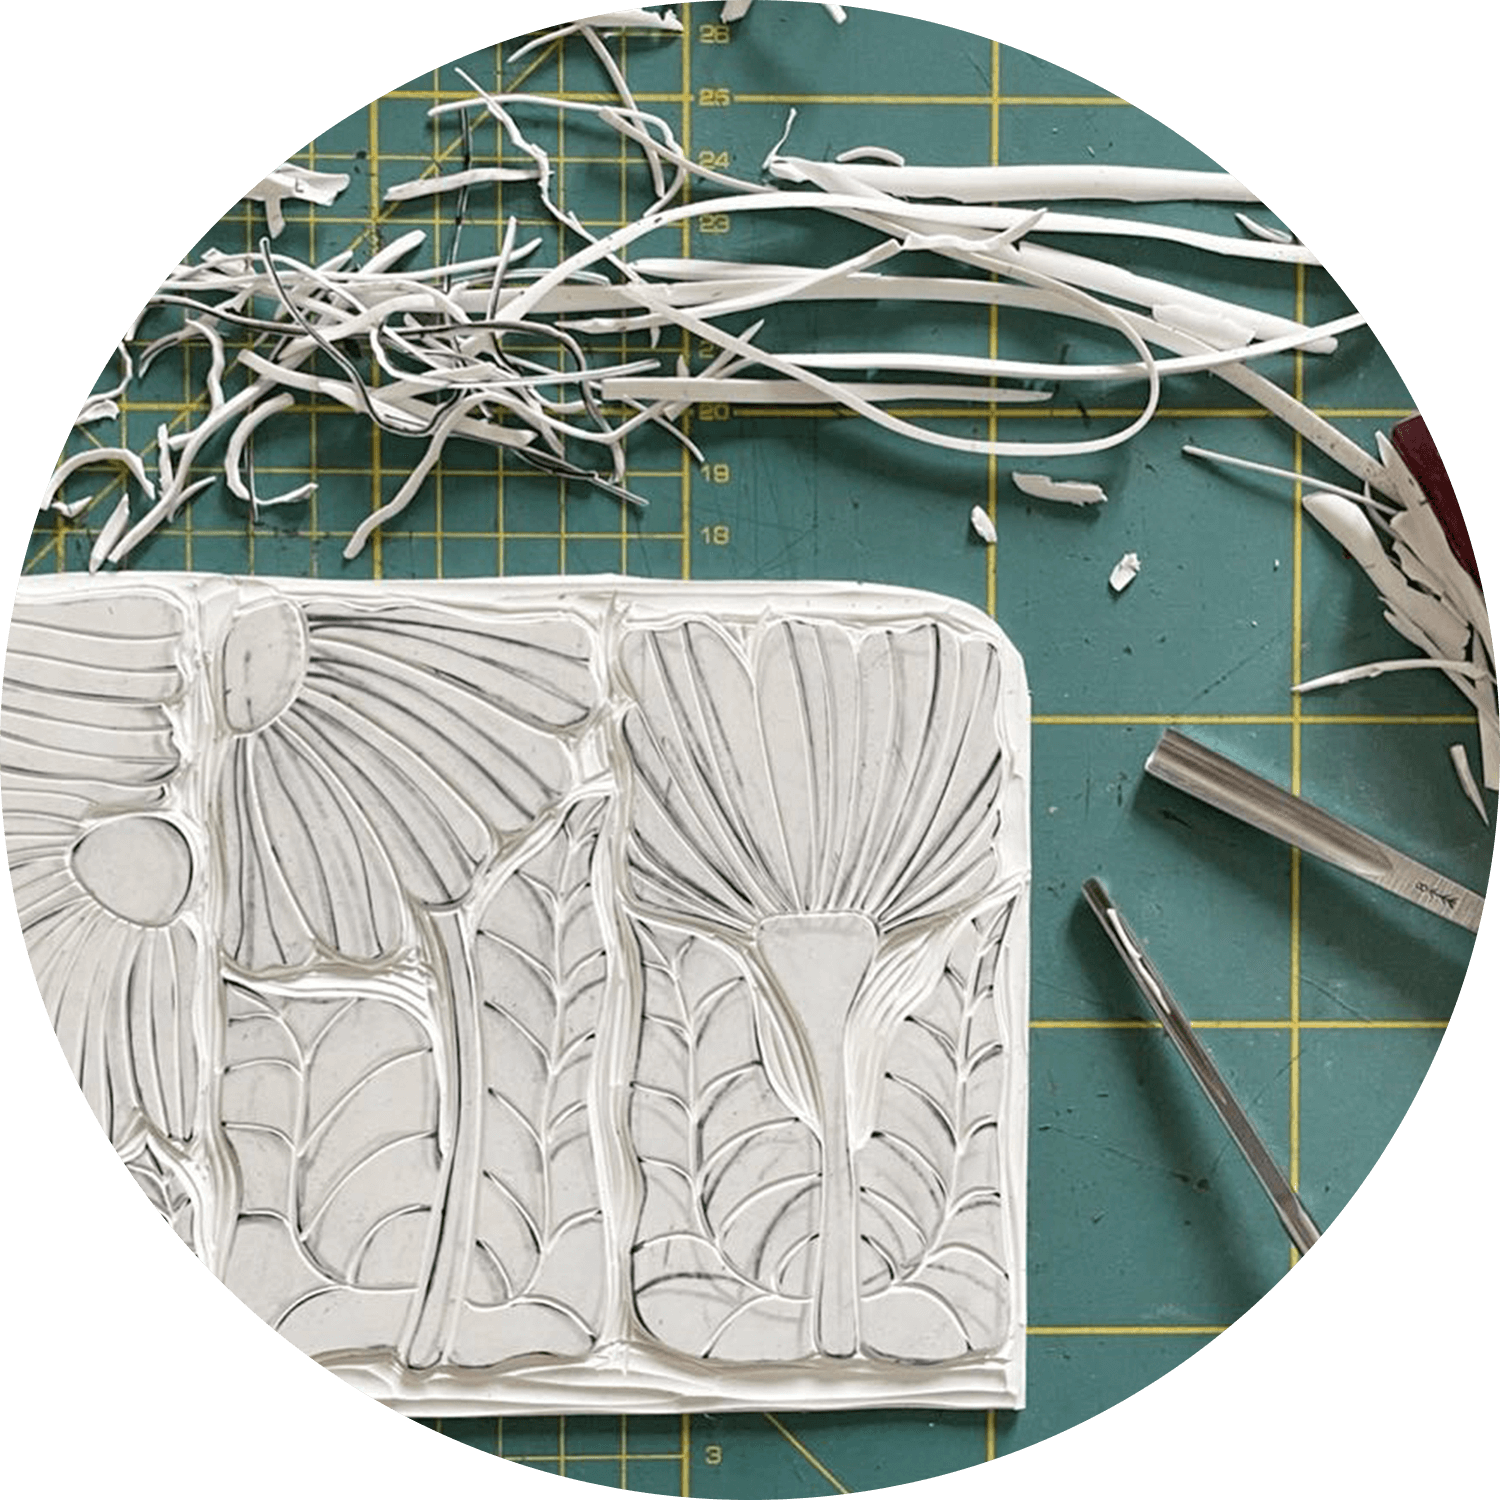 Using lino carving methods to create designs